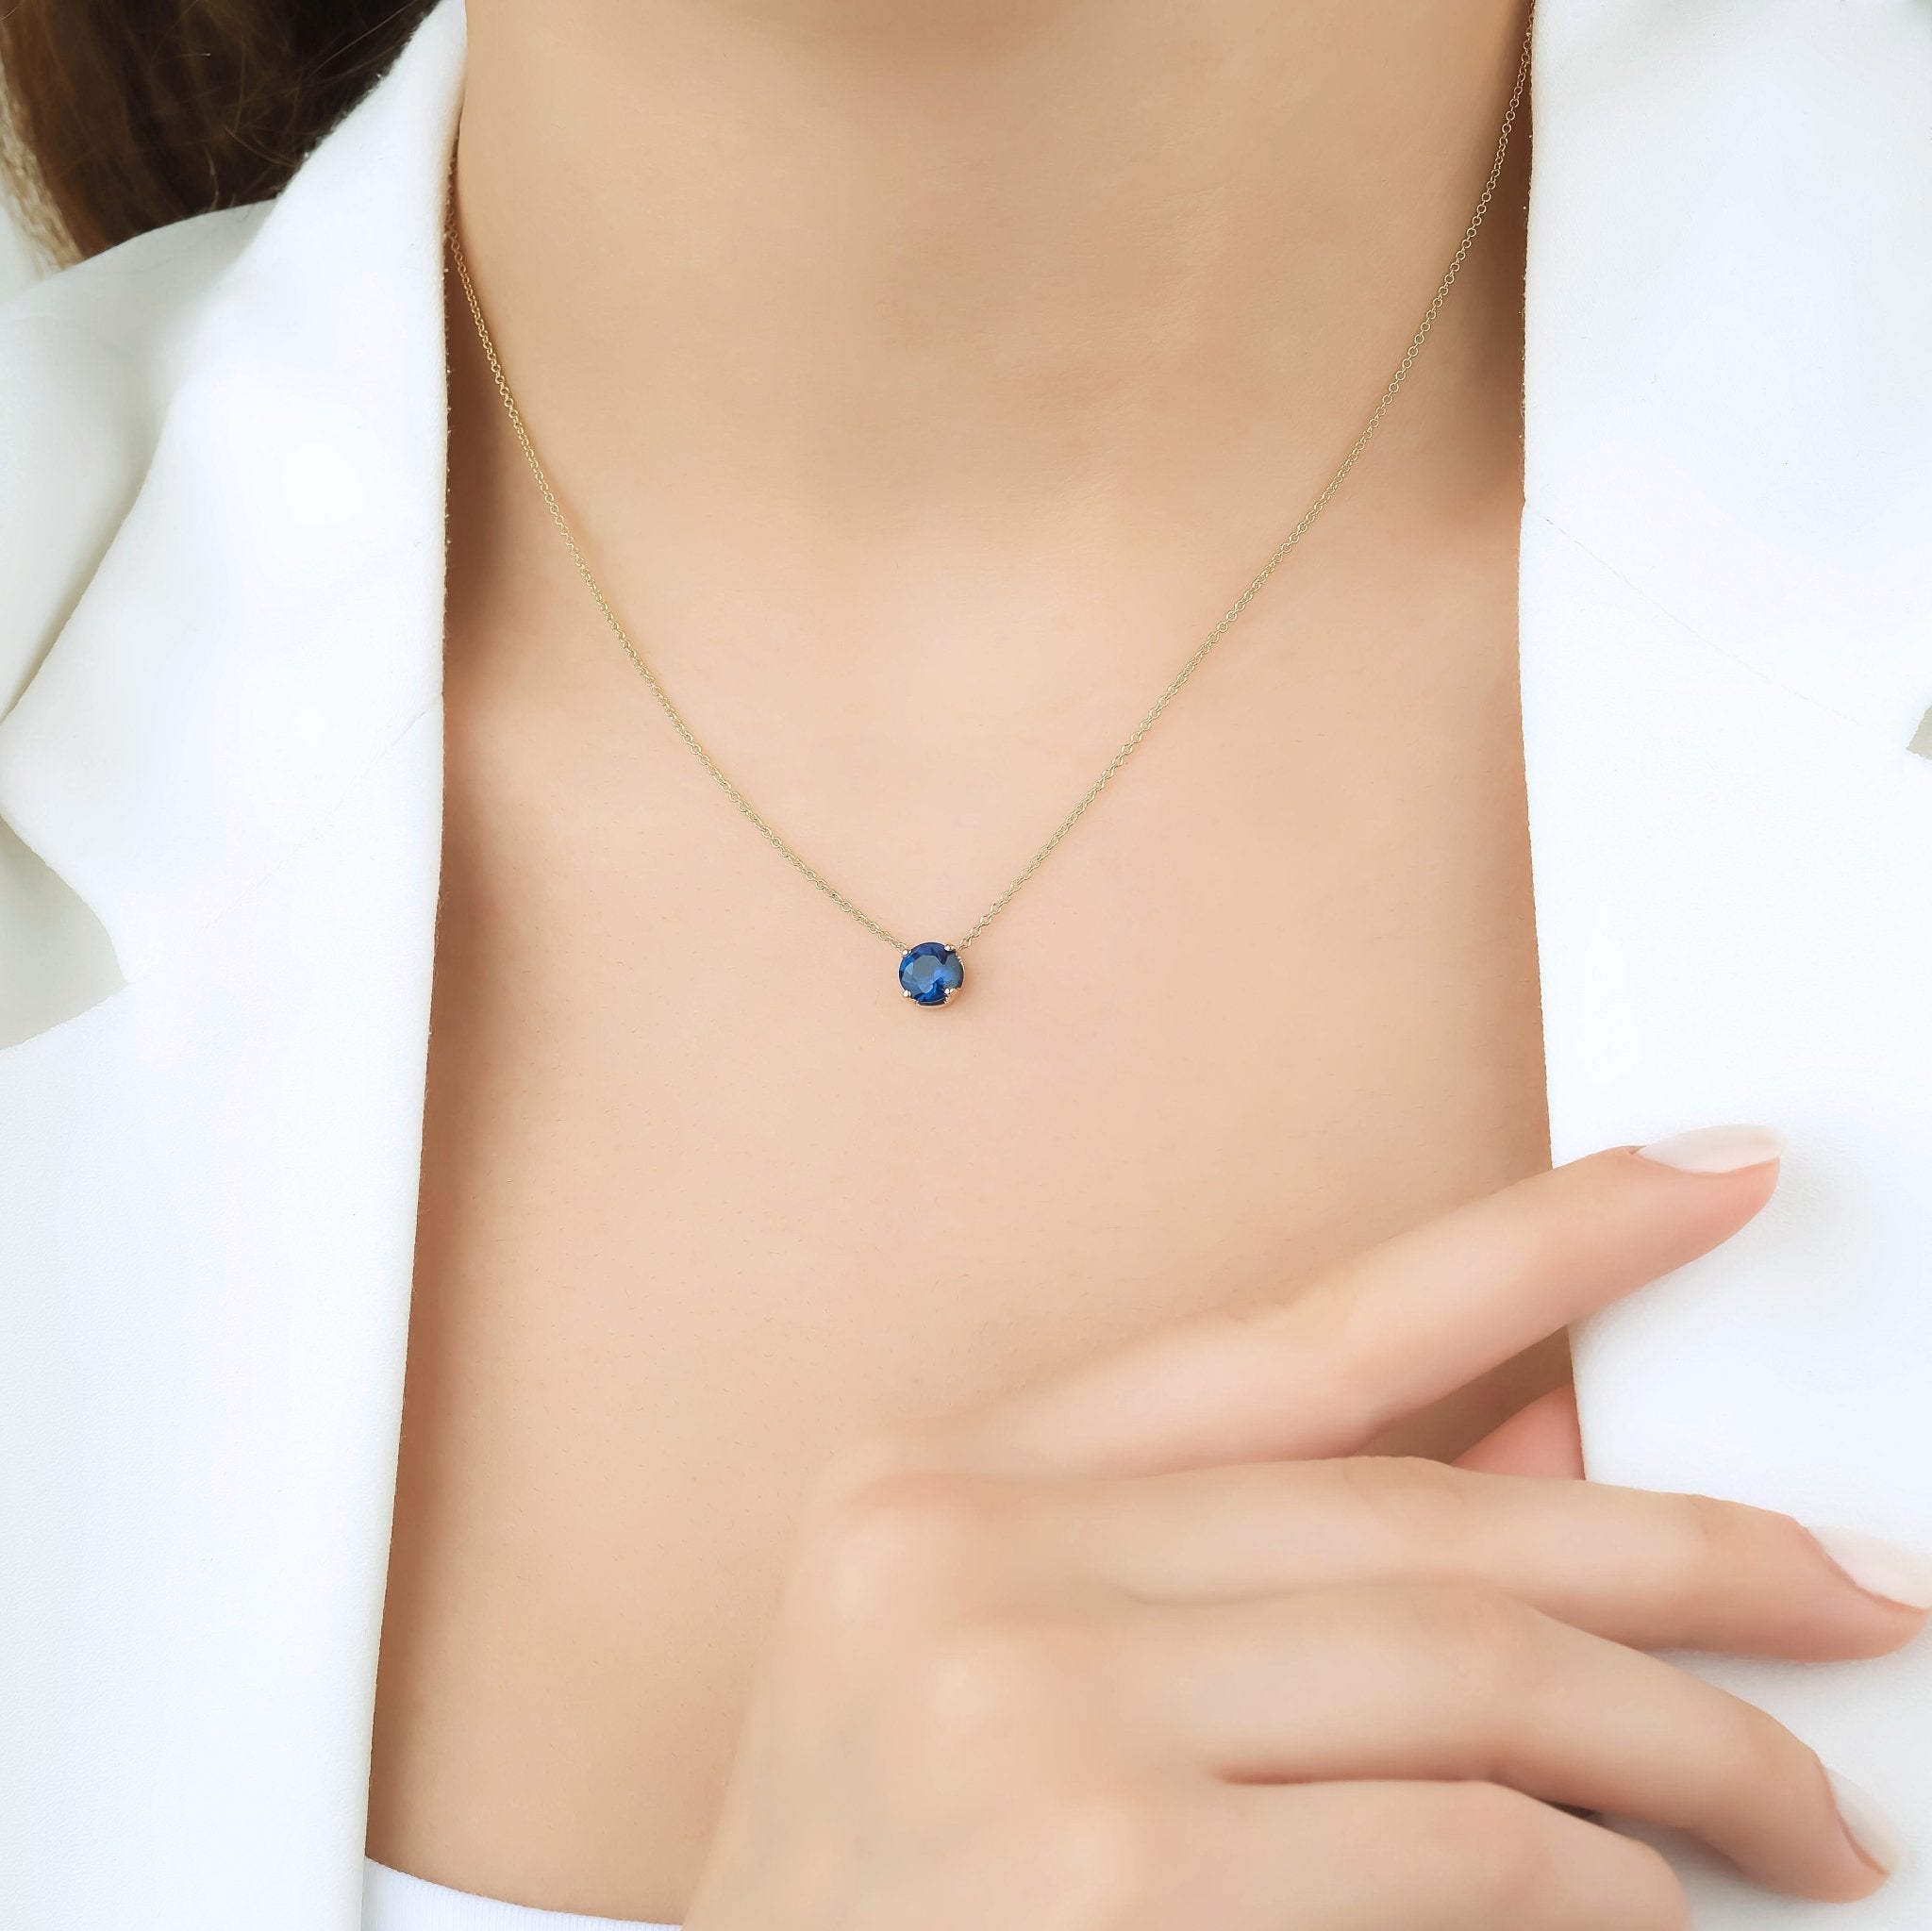 Sapphire Necklace, 14K Solid Yellow Gold 6mm Solitaire Sapphire Necklace